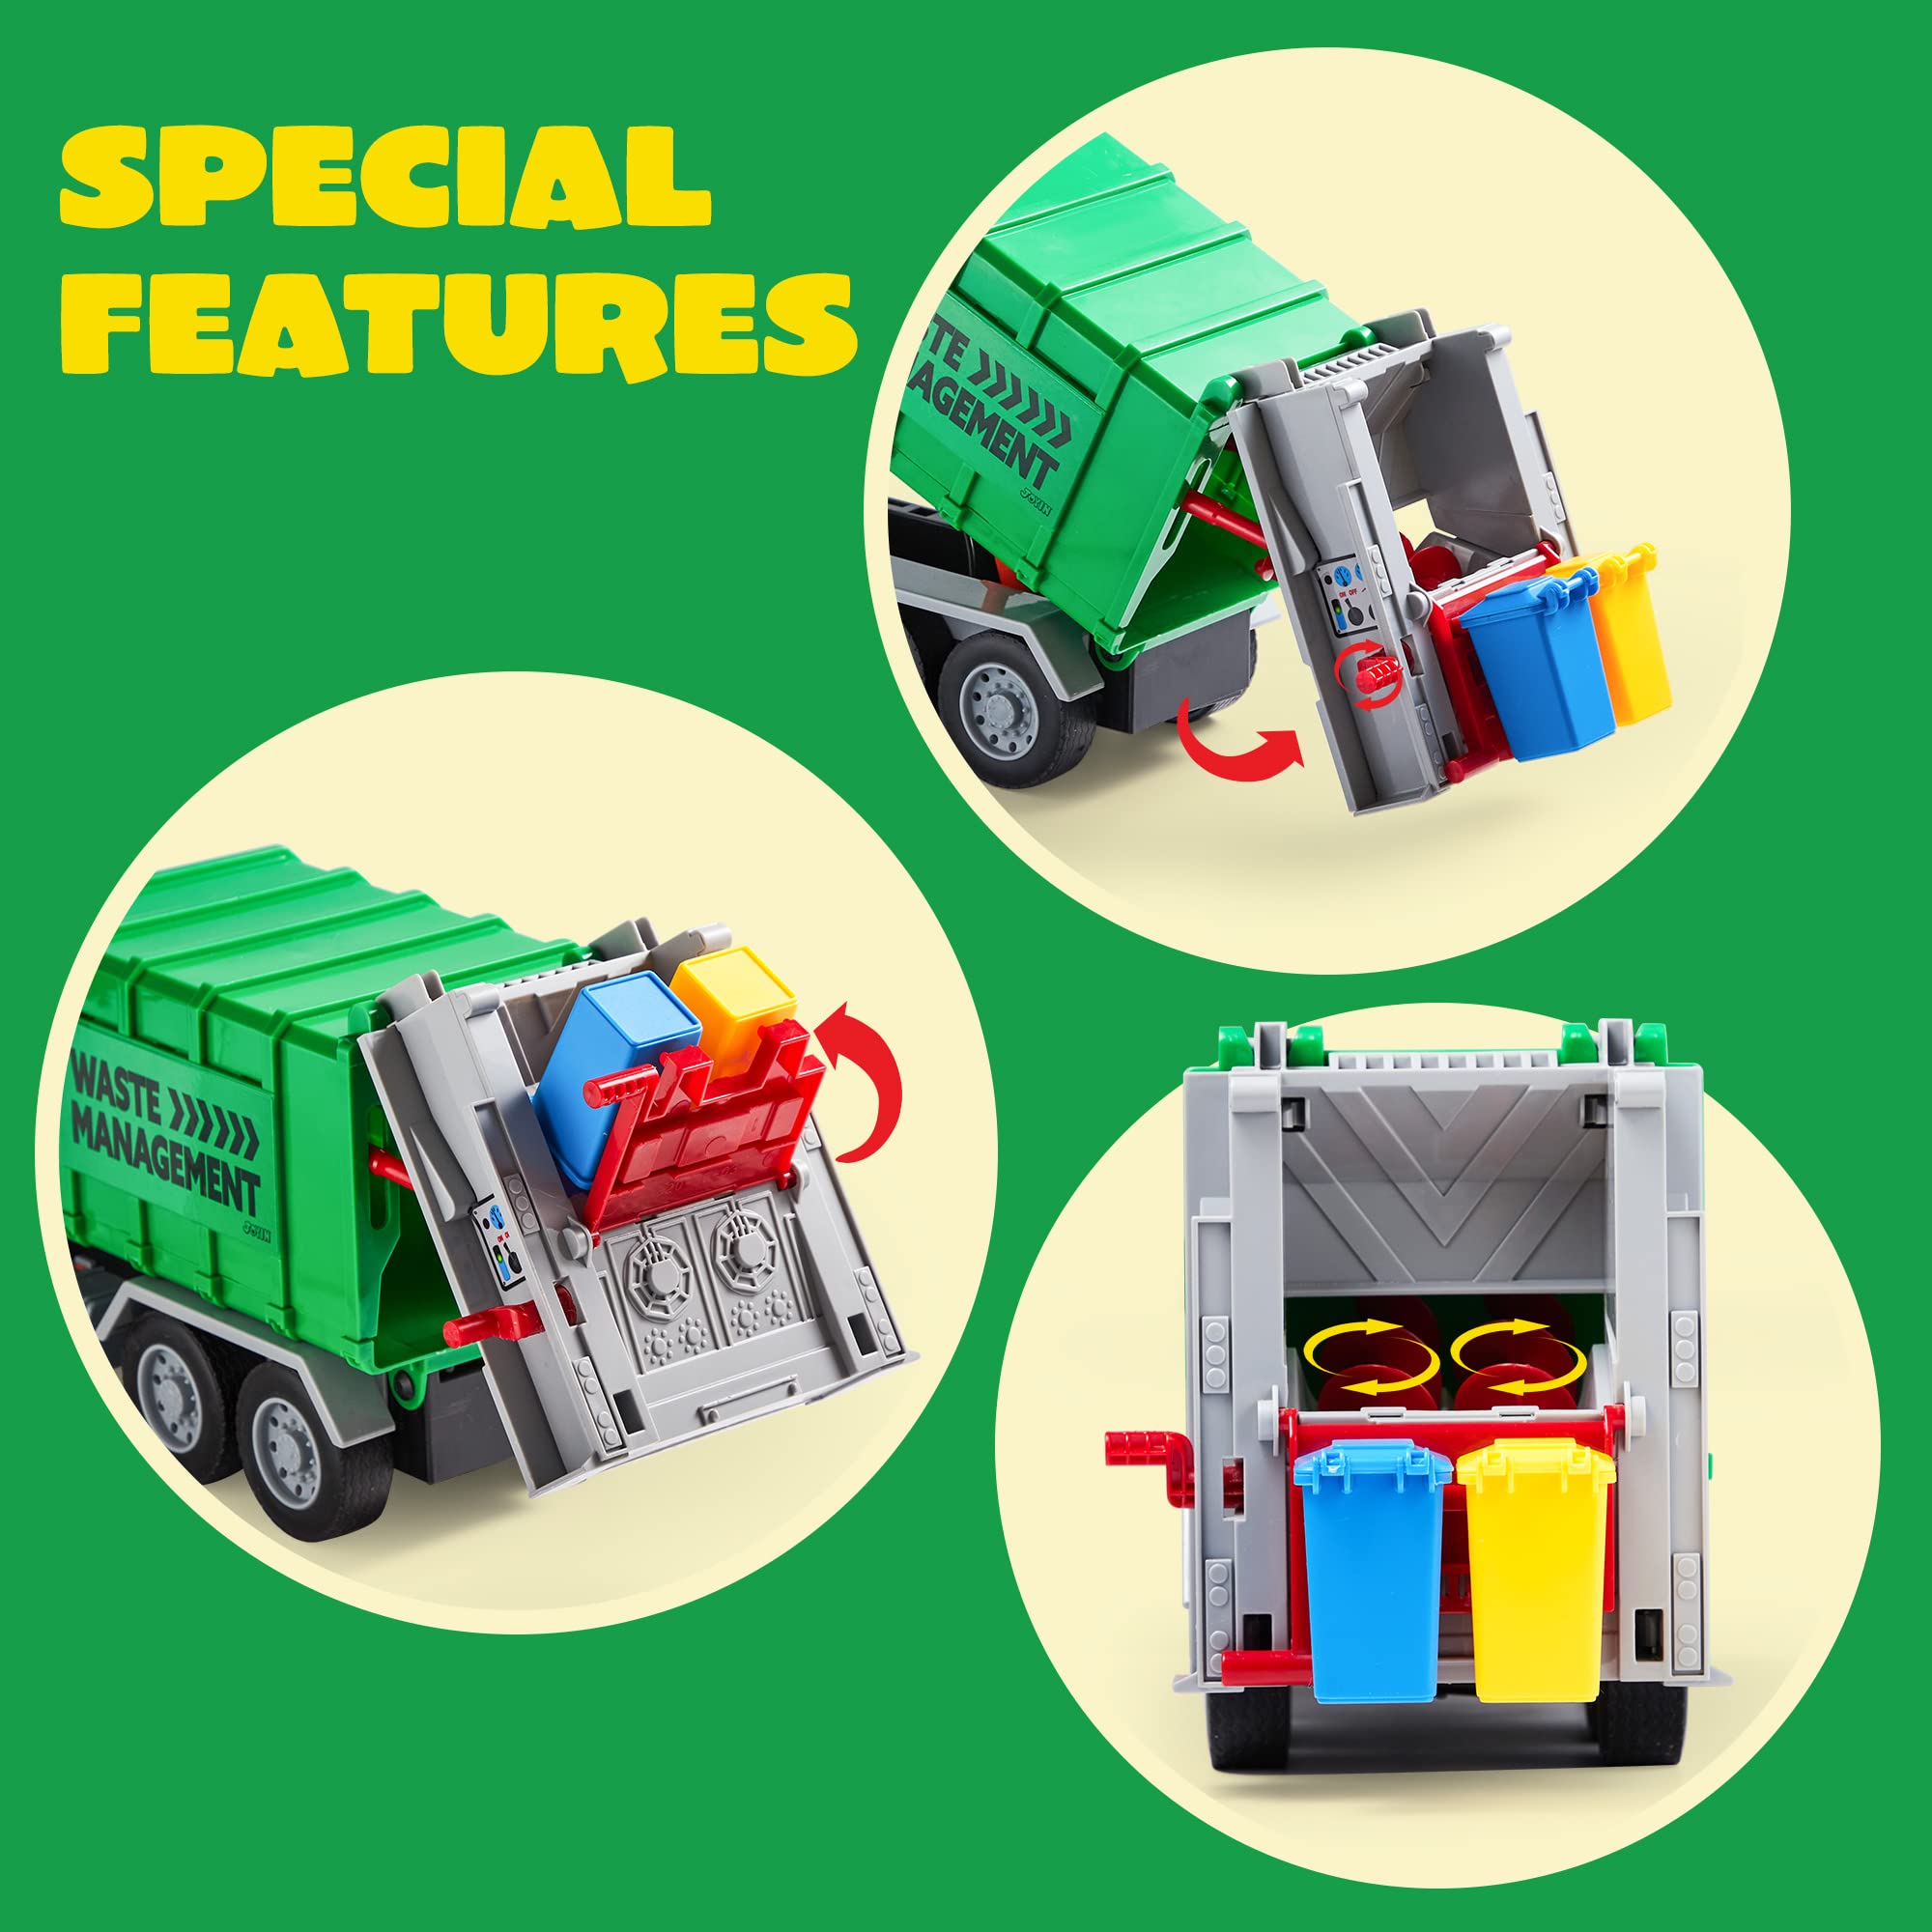 JOYIN 12.5" Garbage Truck Toy, Friction-Powered Trash Truck with Lights & Sounds, Back Dump Garbage Recycling Truck Toy Set with 3 Rear Loader Trash Cans, Boys Girls Toy Cars, Kids Birthday Gifts